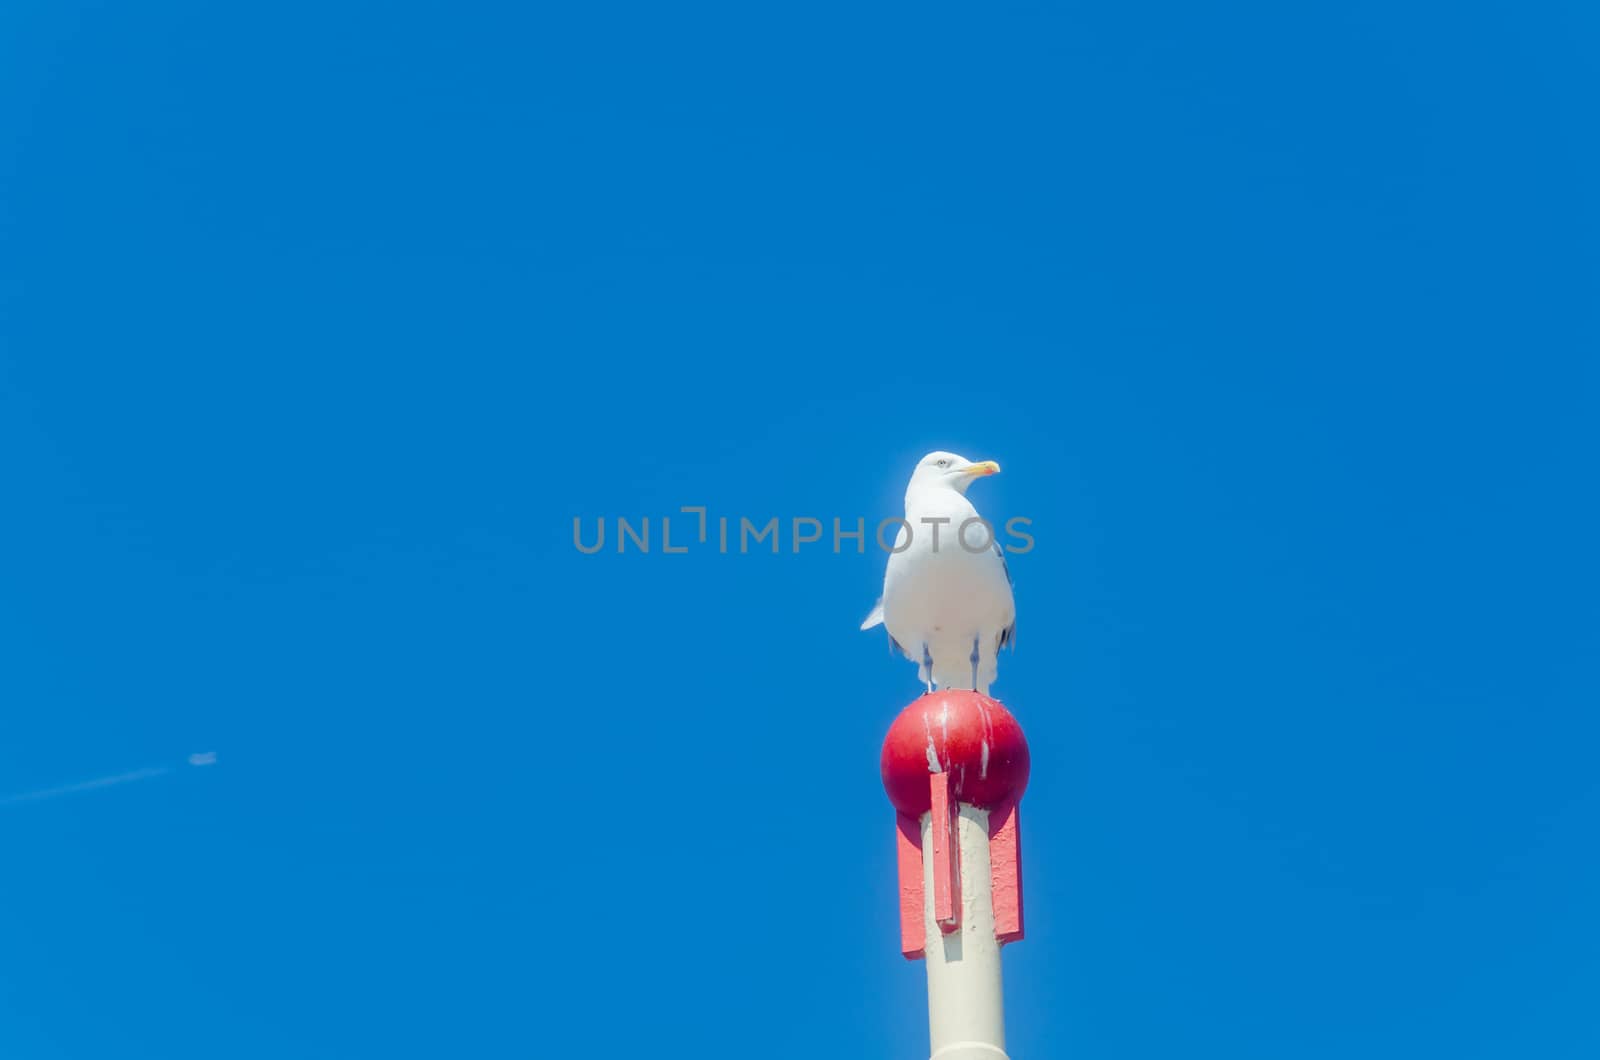 A large seagull sitting on a wooden pole in the background of the blue sky.